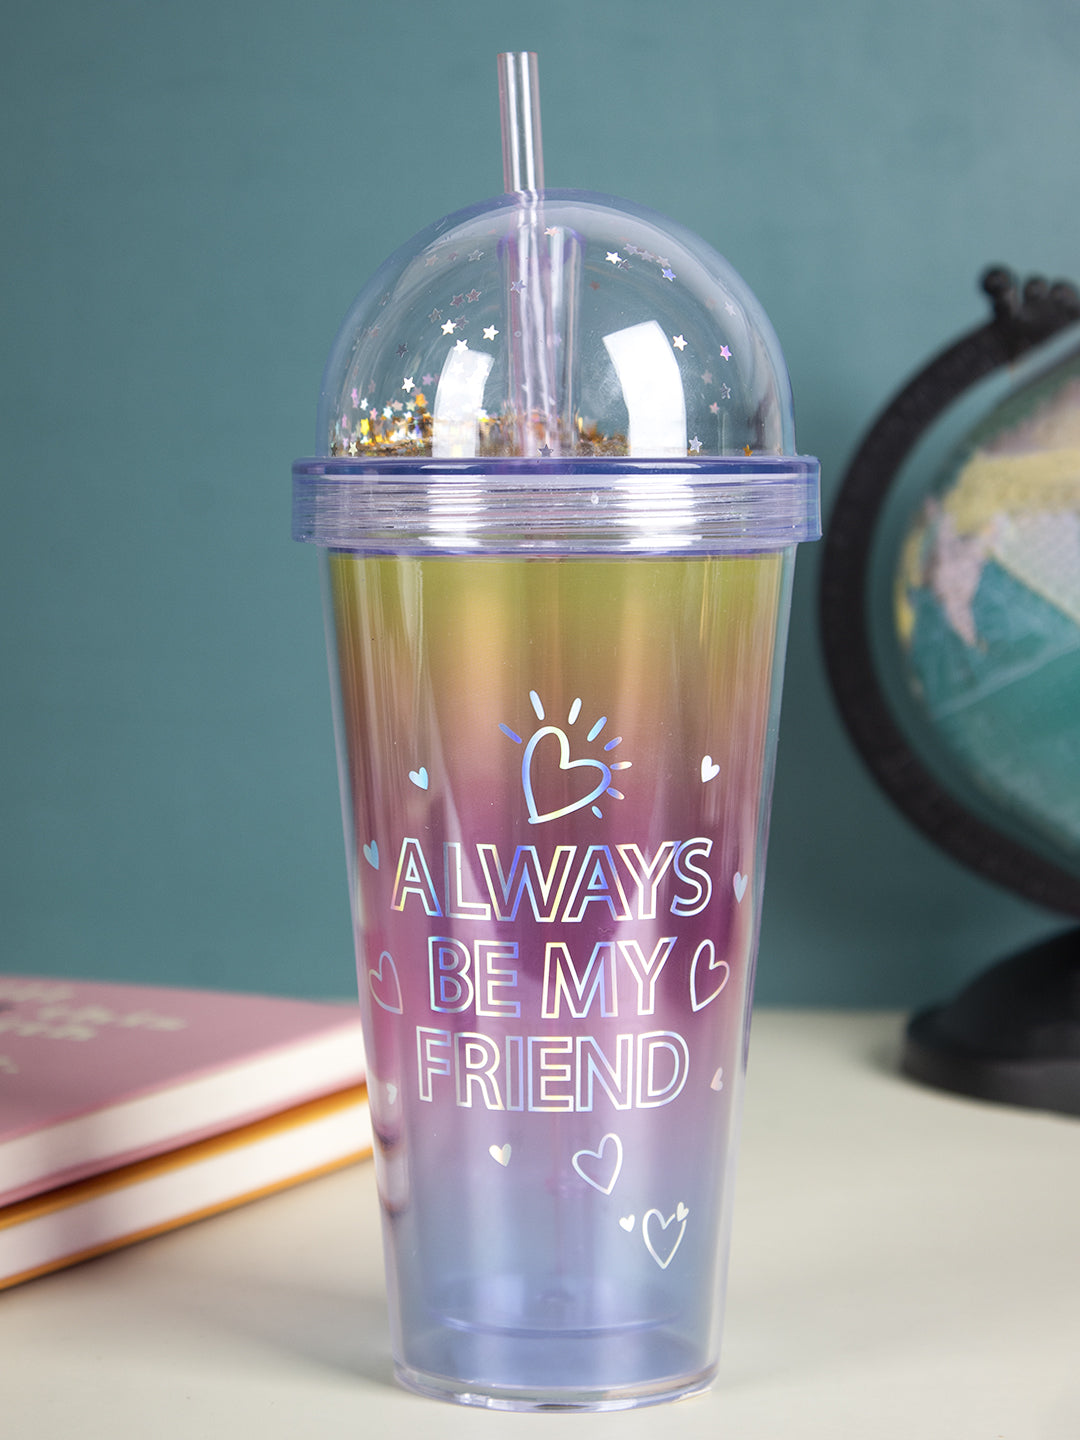 VON CASA 380Ml Plastic Tumbler With Straw And Lid